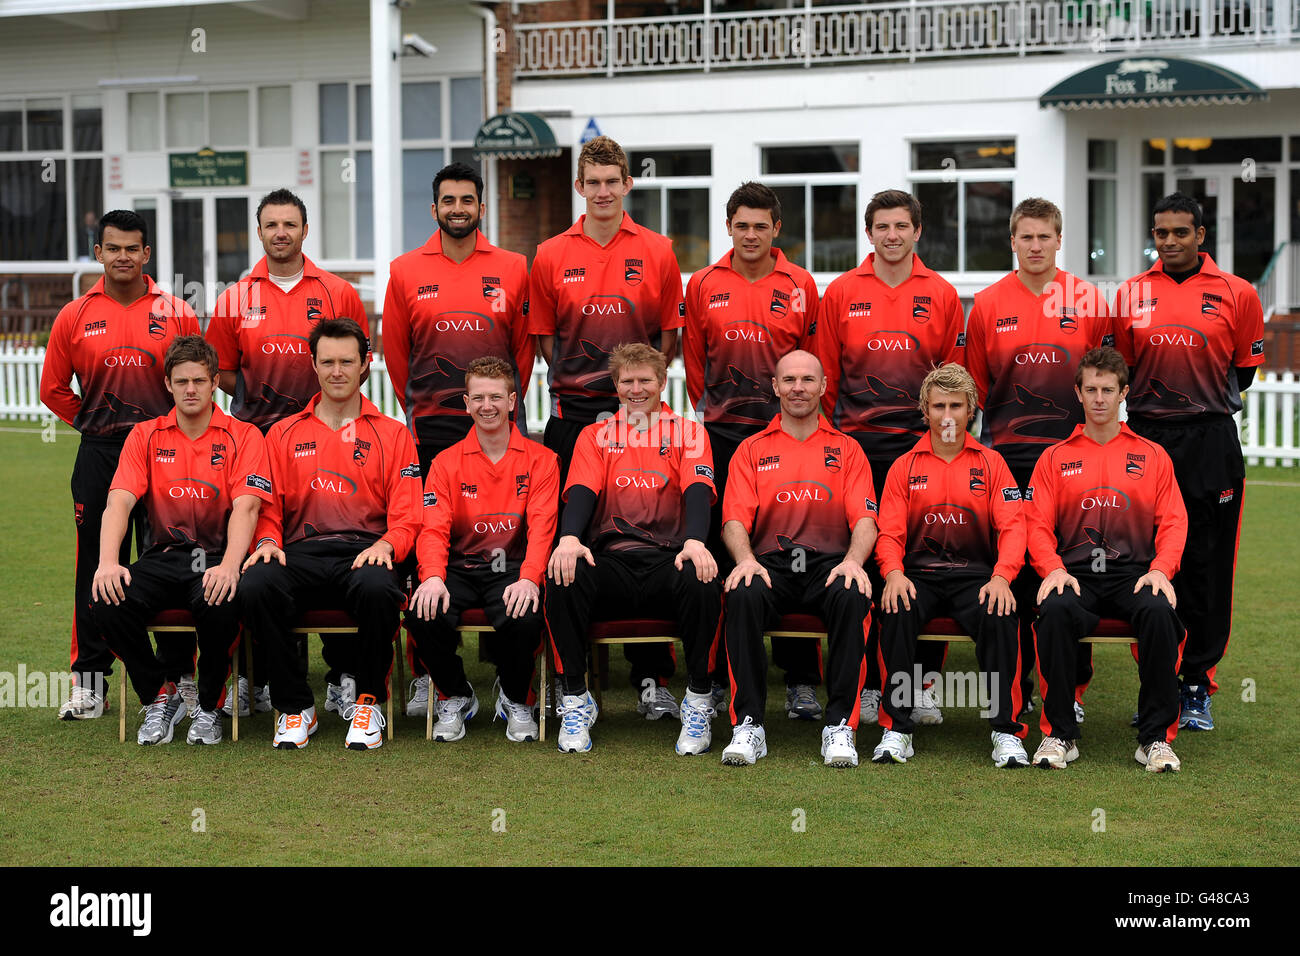 Leicestershire team group in One Day Kit: (back row left to right) Shiv Thakor, Jacques du Toit, Nadeem Malik, Alex Wyatt, Nathan Buck, Harry Gurney, Josh Cobb and Jigar Naik (front row left to right) Wayne White, Will Jefferson, Tom New, Matthew Hoggard (captain), Paul Nixon, James Taylor and Matthew Boyce Stock Photo